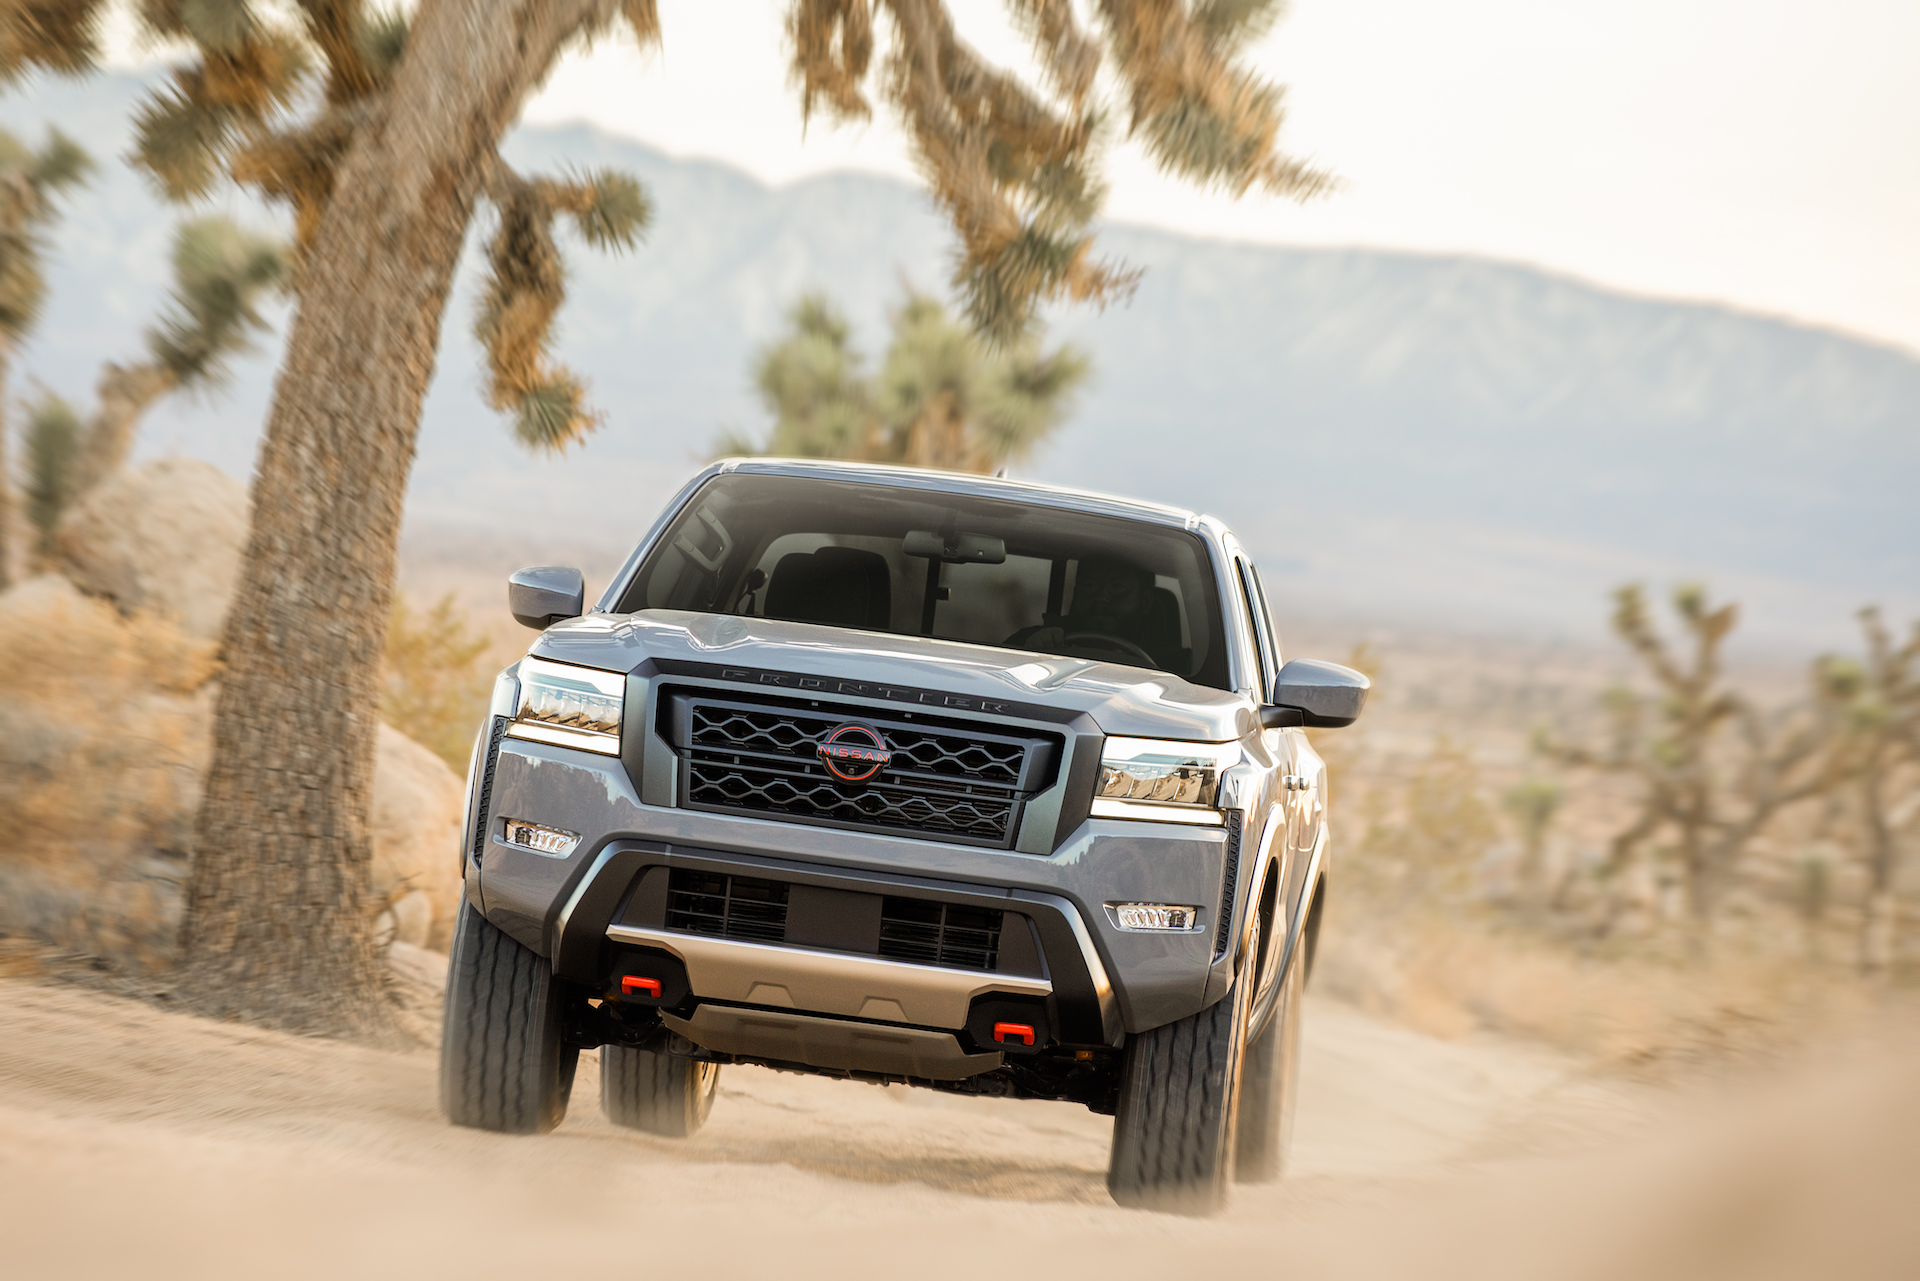 An image of a 2022 Nissan Frontier off-roading in dirt